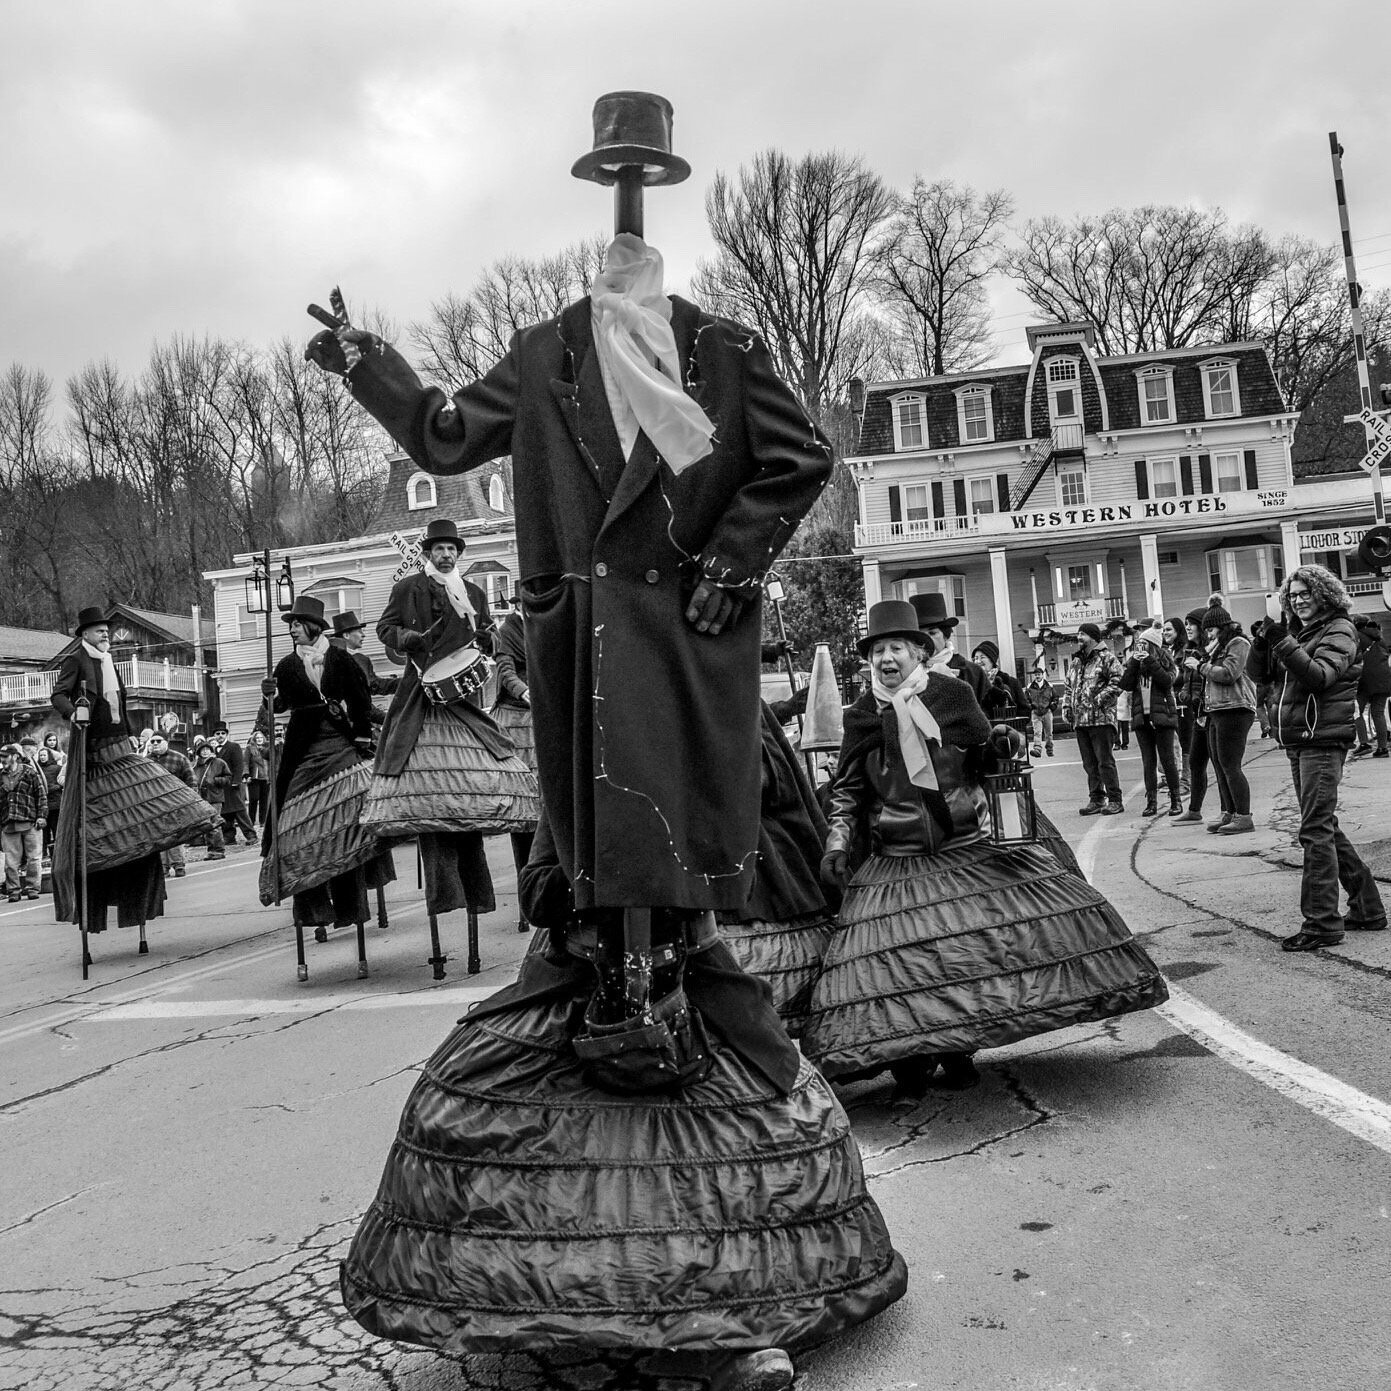 Farm Arts Collective will return to Dickens on the Delaware on December 9 to perform innovative takes on Charles Dickens' works.